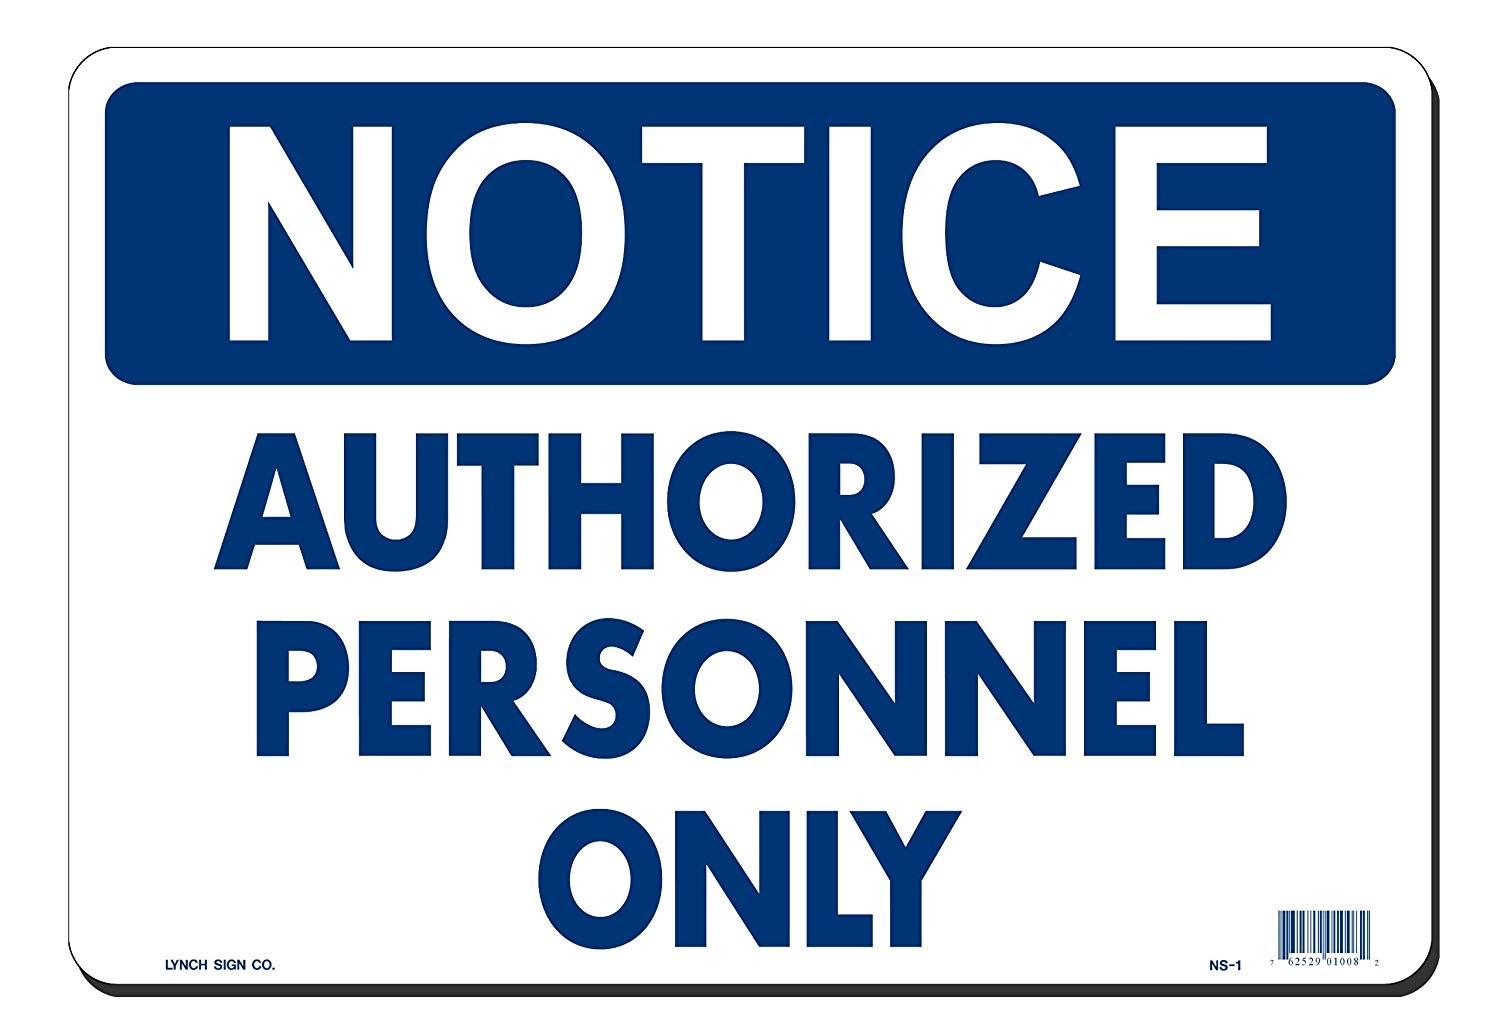 Lynch NS-1, Notice Authorized Personnel Only, Blue and White, 14" x 10"